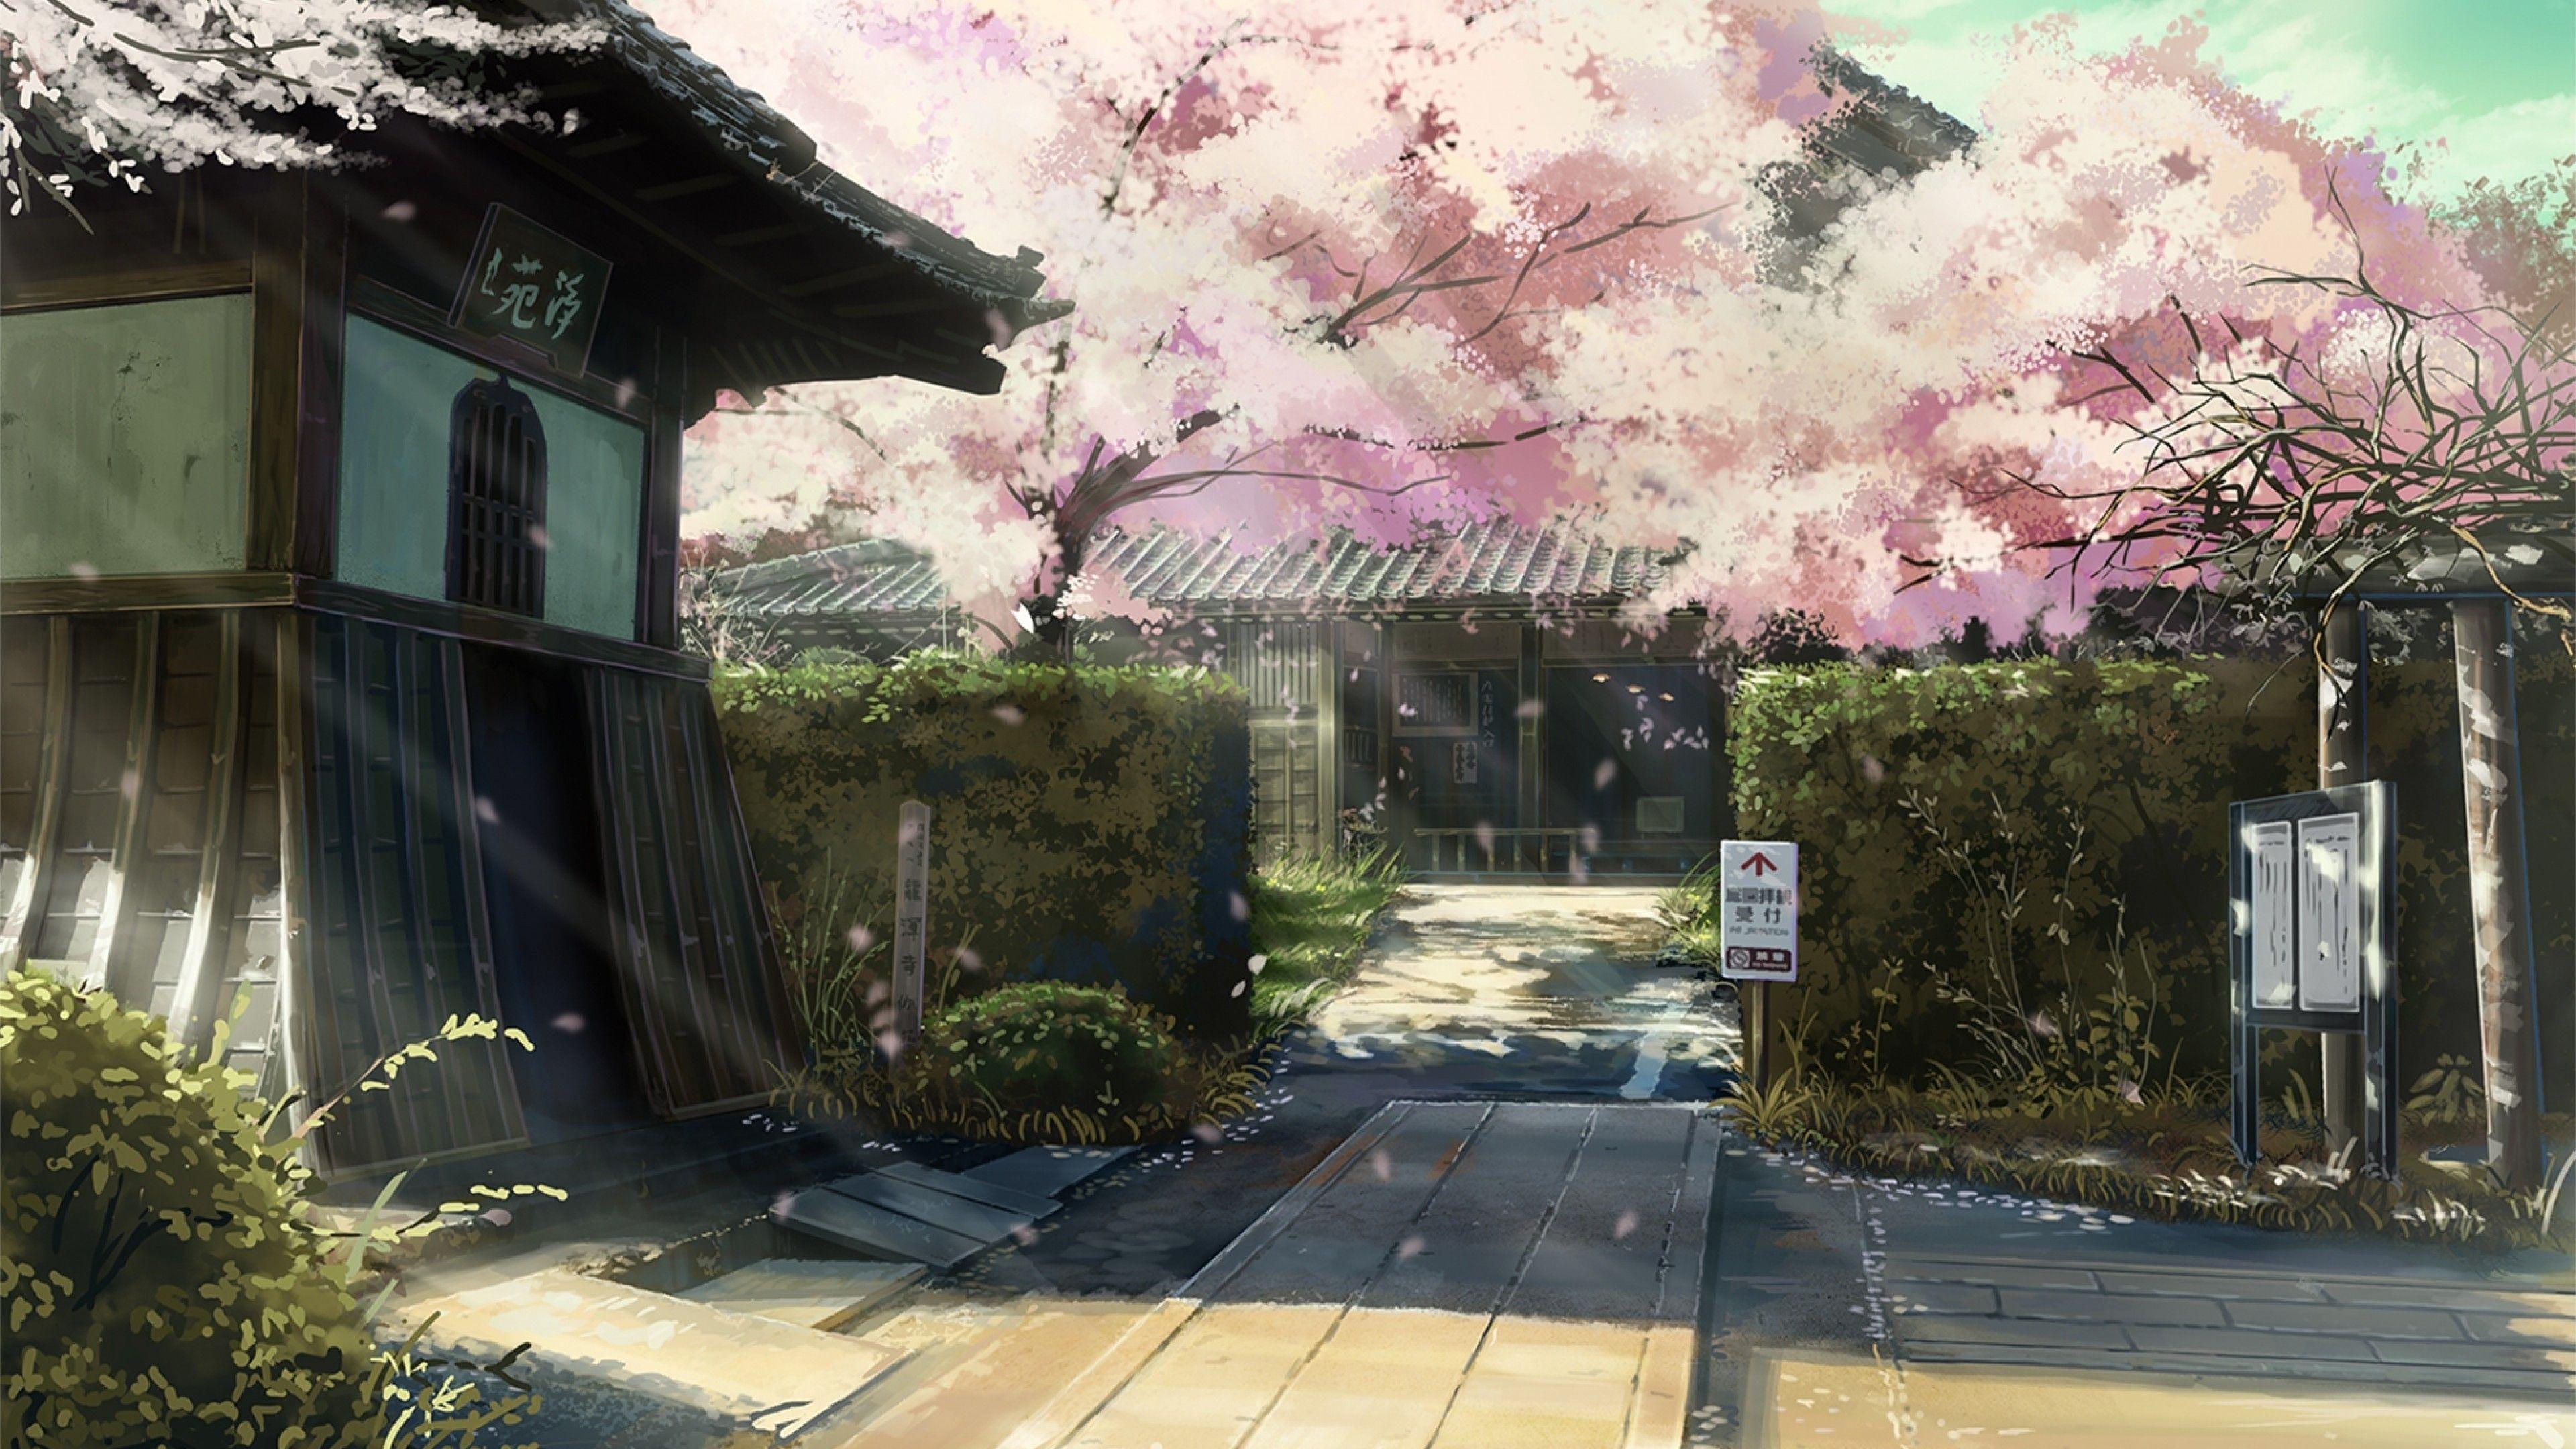 8403 Anime House Images Stock Photos  Vectors  Shutterstock